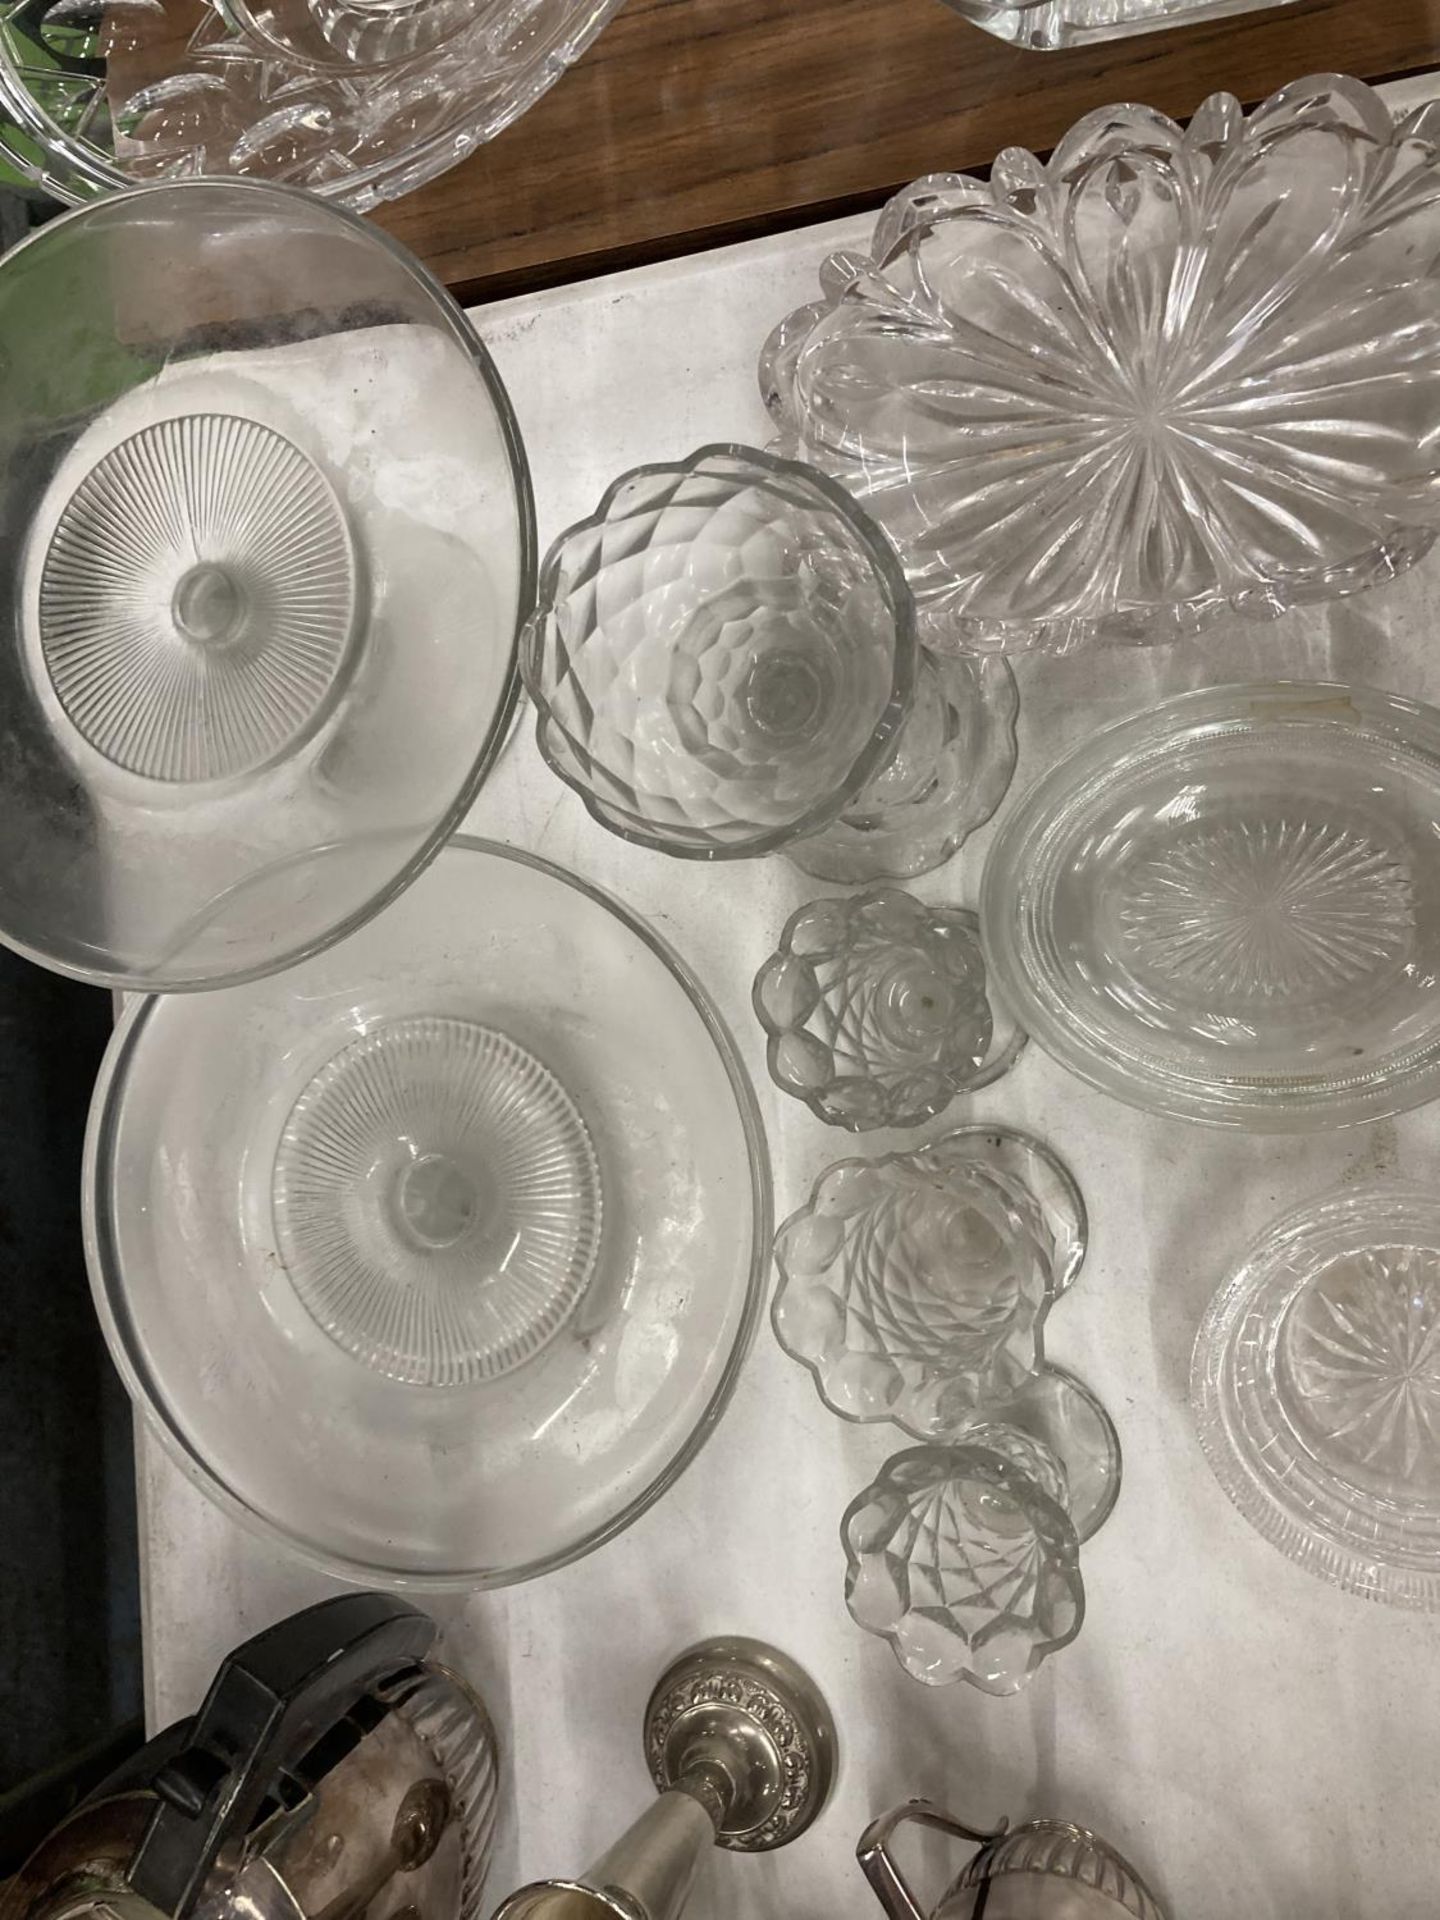 A QUANTITY OF GLASSWARE TO INCLUDE CAKE STANDS, VASES, BOWLS, DISHES, ETC - Image 4 of 4